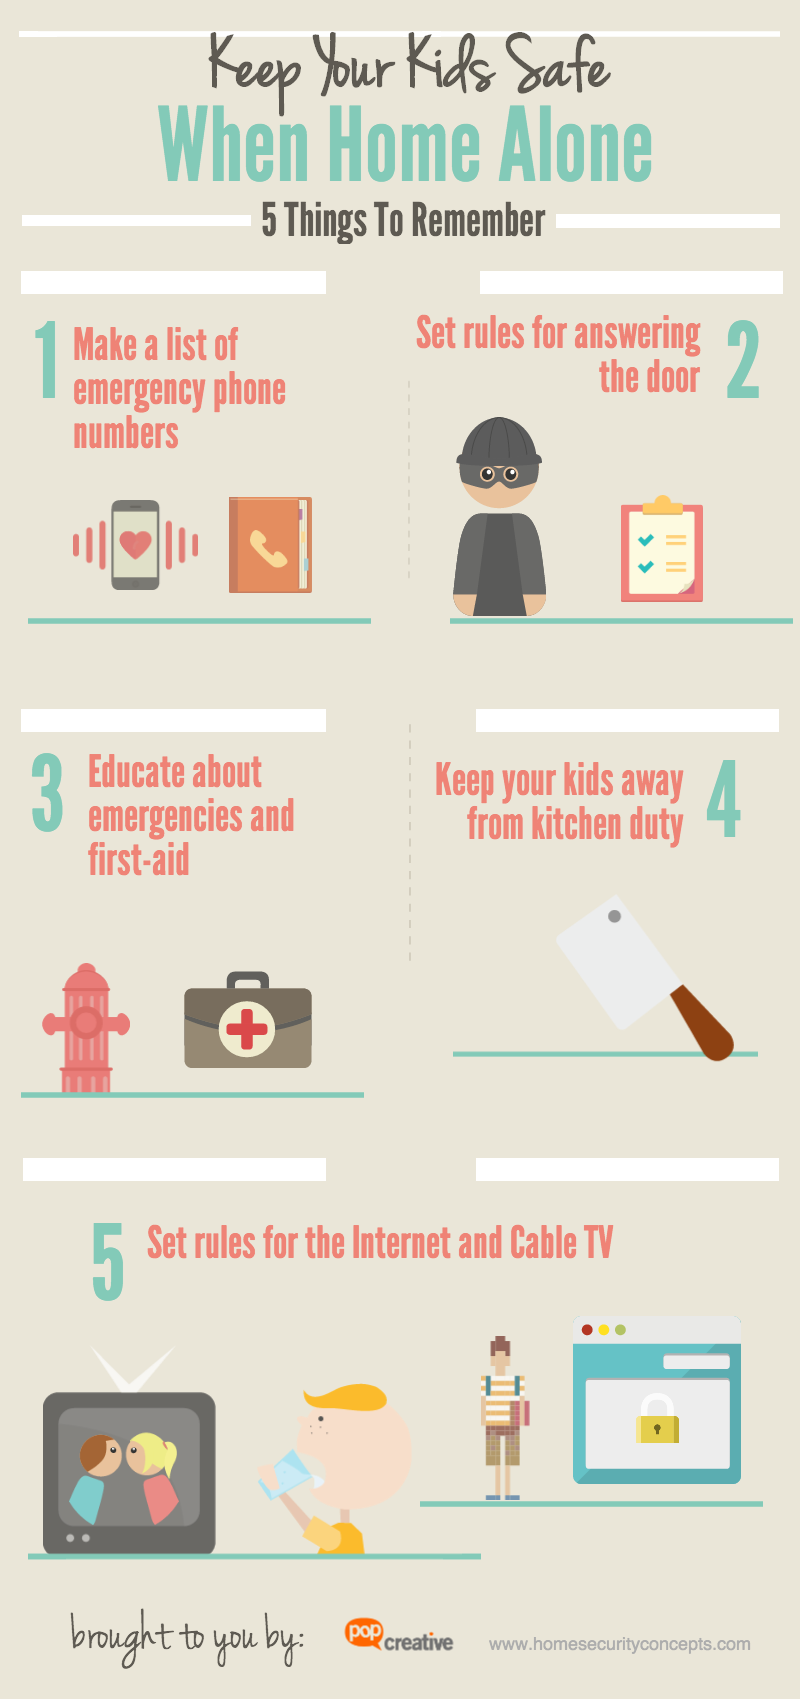 Keep Your Kids Safe When Home Alone #infographic